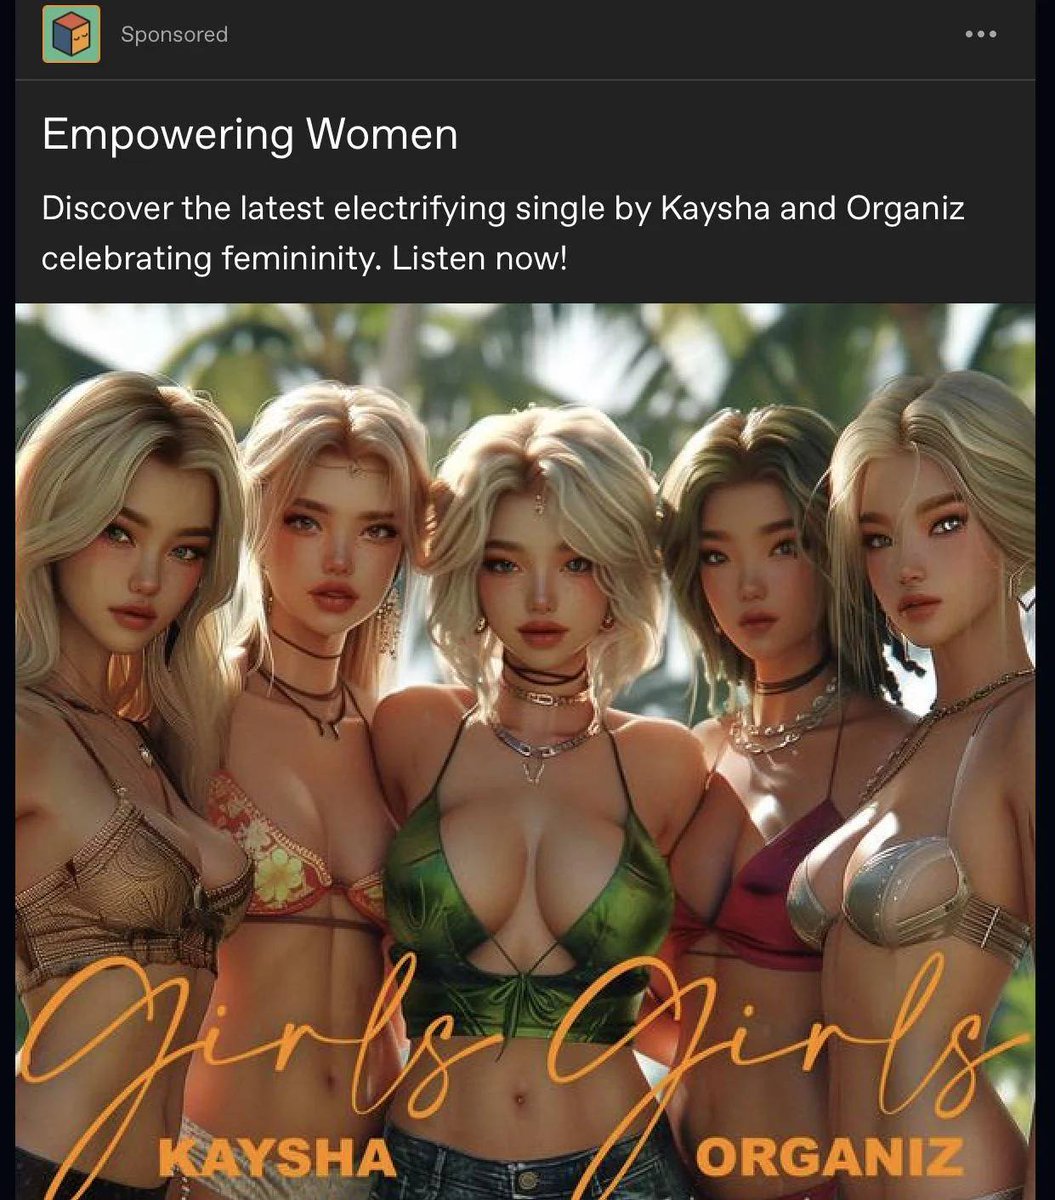 How is this empowering women exactly?